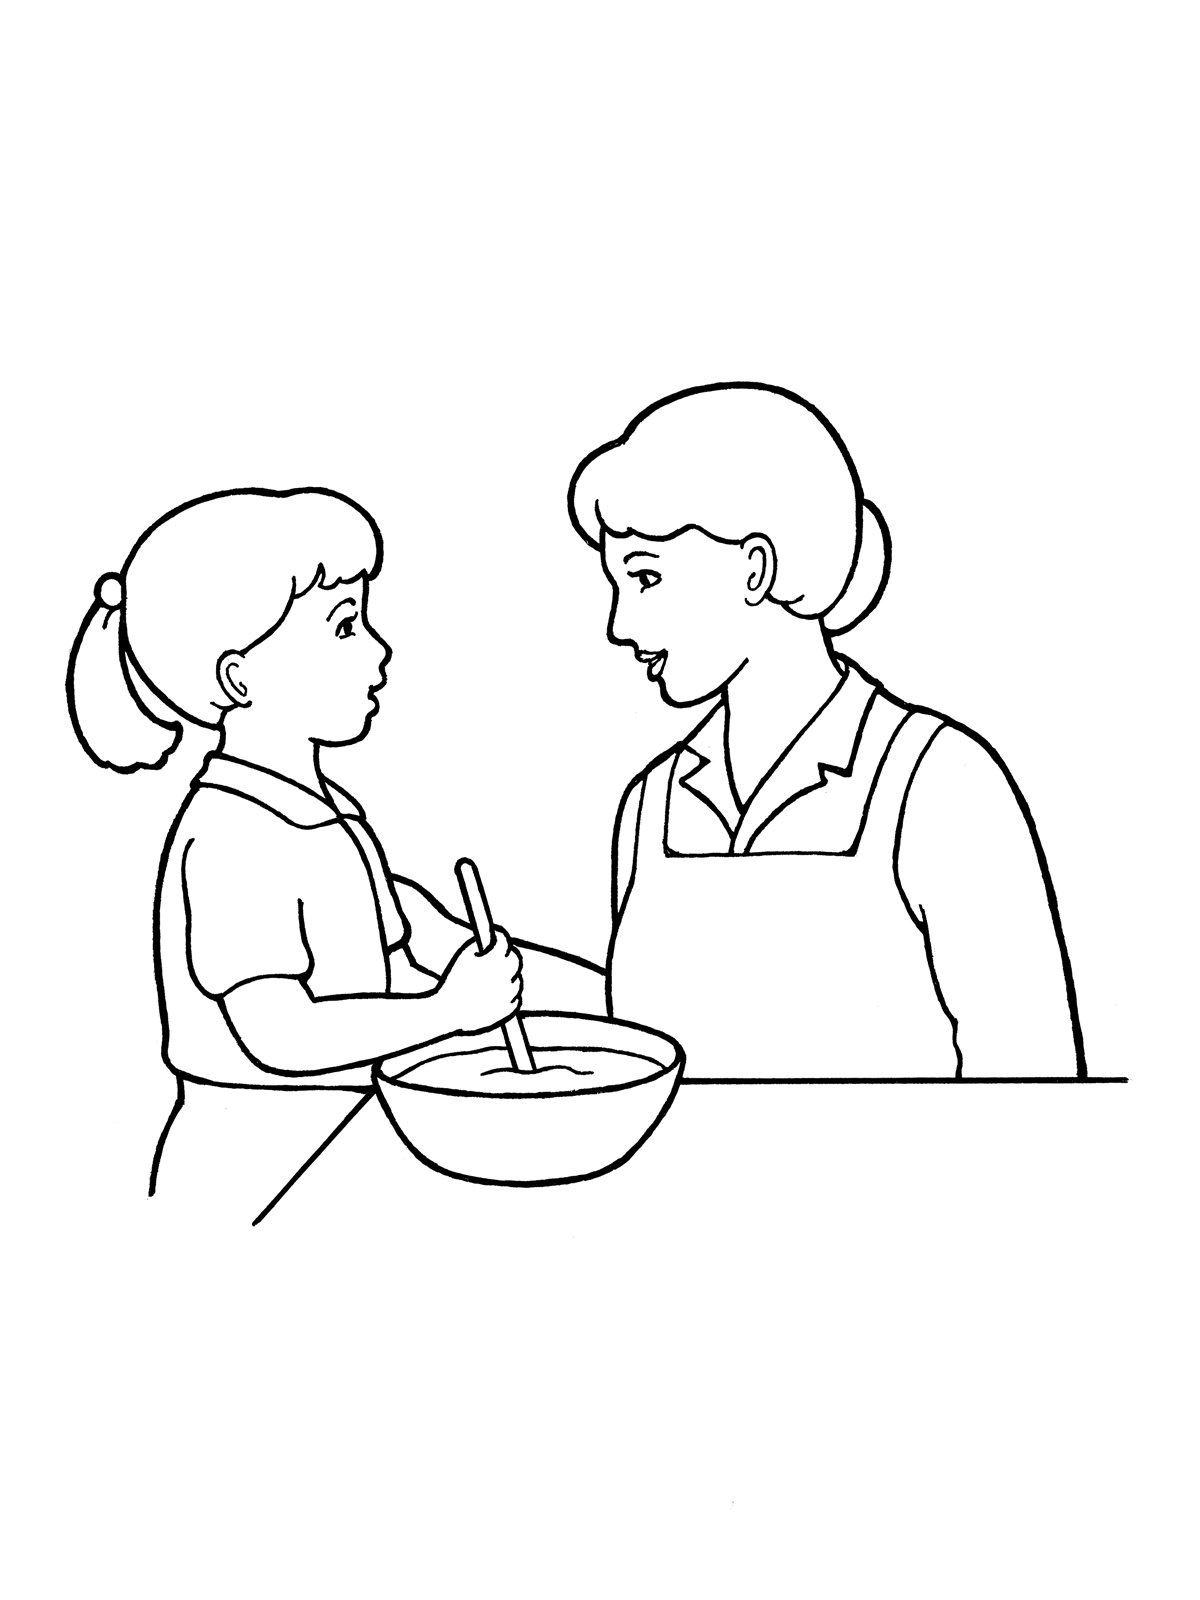 lds clipart mother - photo #49